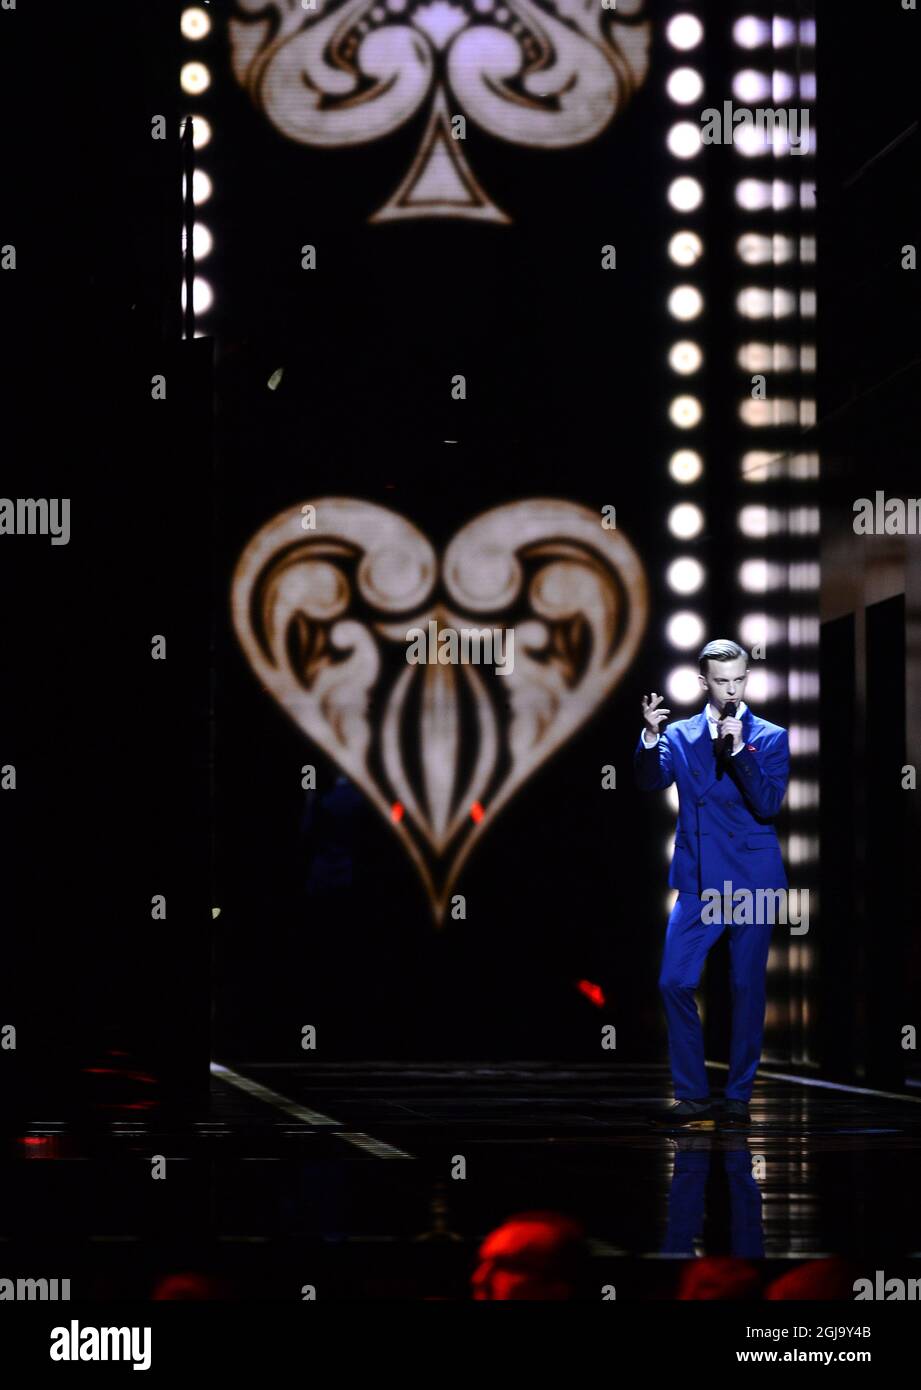 STOCKHOLM 2016-05-09 Estonia's JÃƒÂ¼ri Pootsmann rehearses the song Ã¢Â€ÂPlayÃ¢Â€Â during the jury show at the Ericsson Globe Arena in Stockholm, Sweden, May 9, 2016. The Eurovision Song Contest 2016 starts with the first semifinal on Tuesday May 10. Photo: Maja Suslin / TT / Kod 10300 ** SWEDEN OUT **  Stock Photo